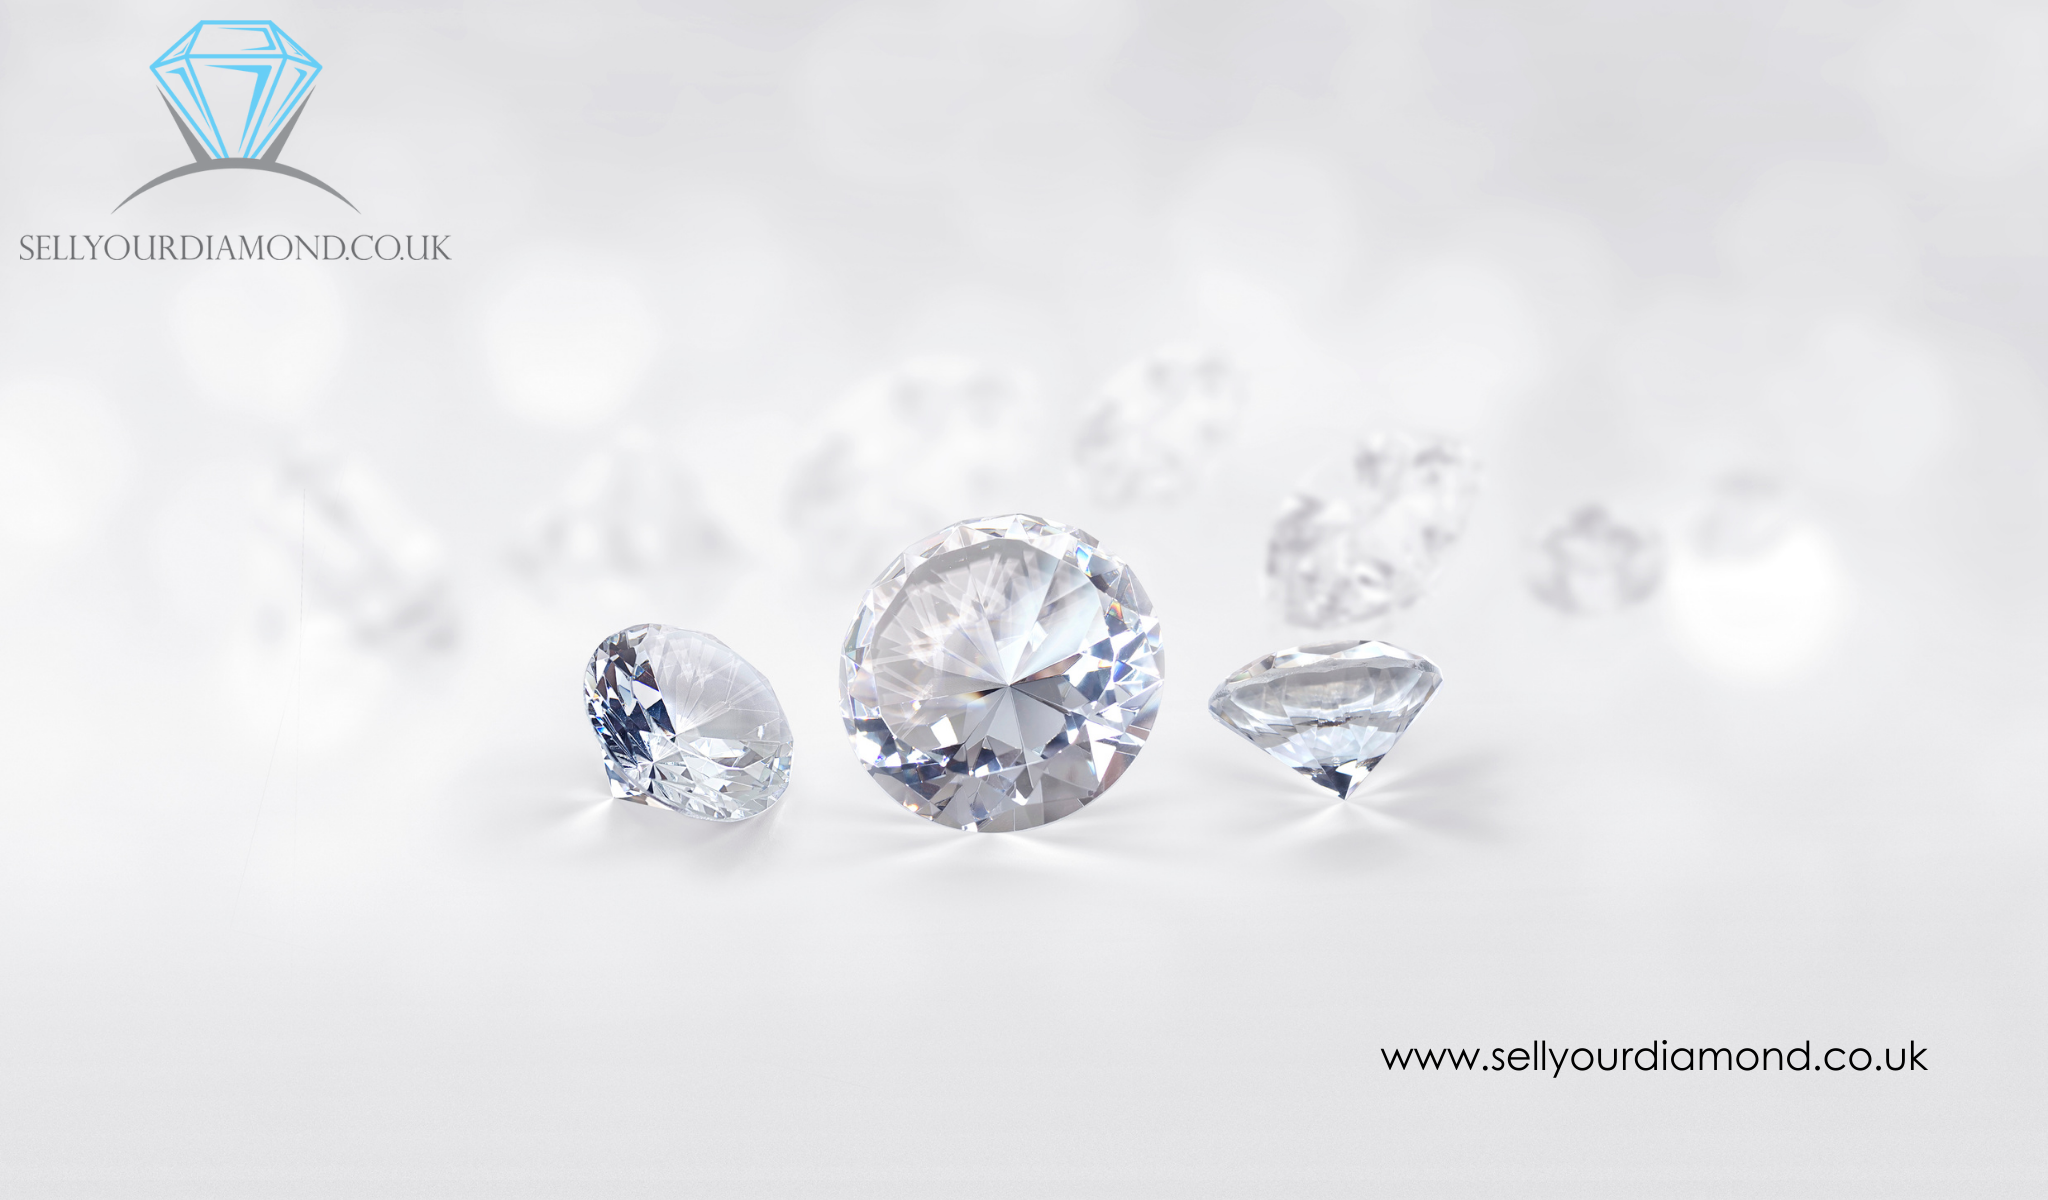 A Sparkling Investment: Discover the Value in Buying Old Diamonds